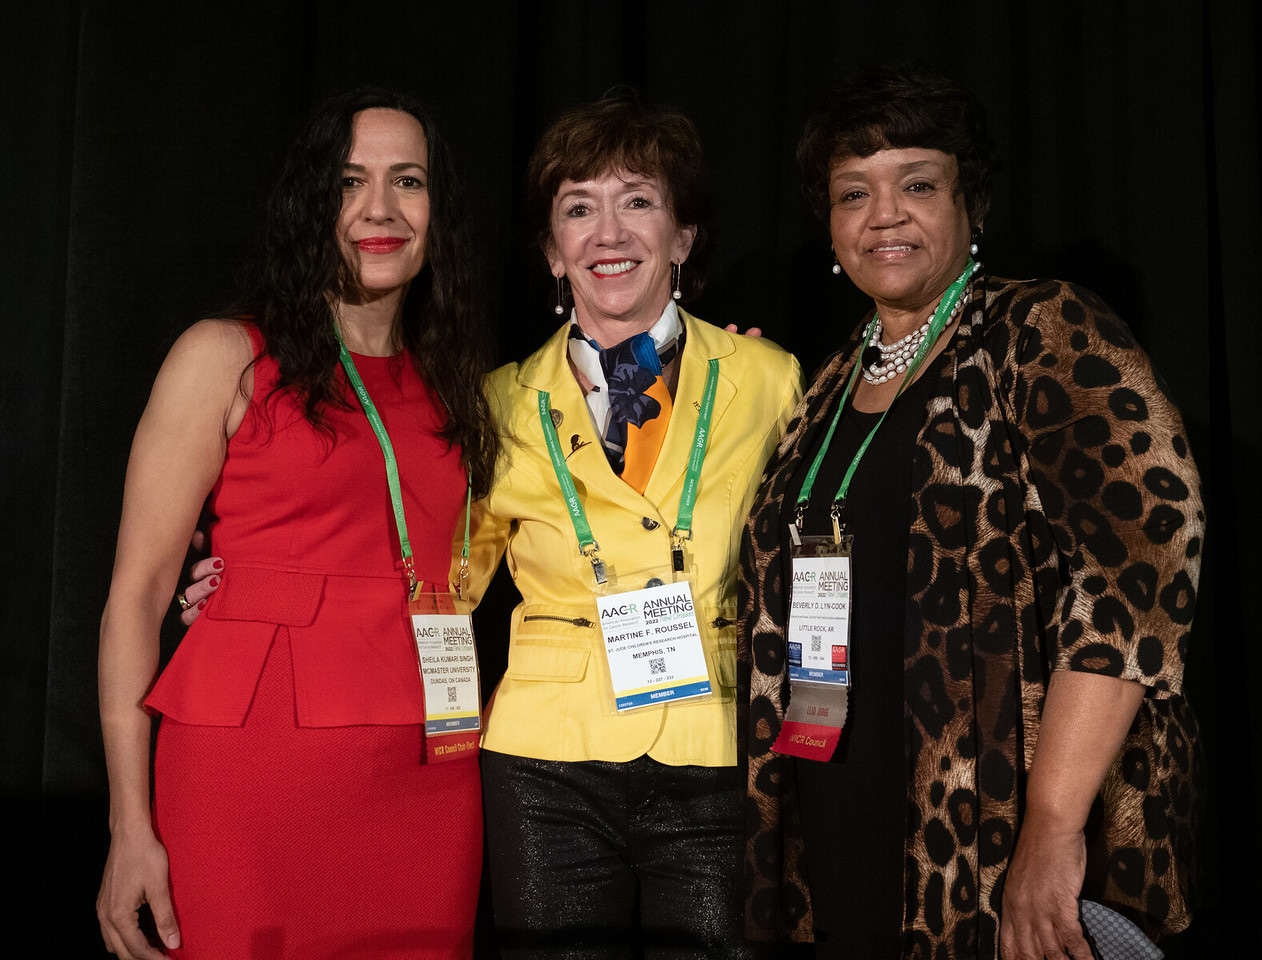 Sheila K. Singh, Martine F. Roussel, and Beverly D. Lyn-Cook